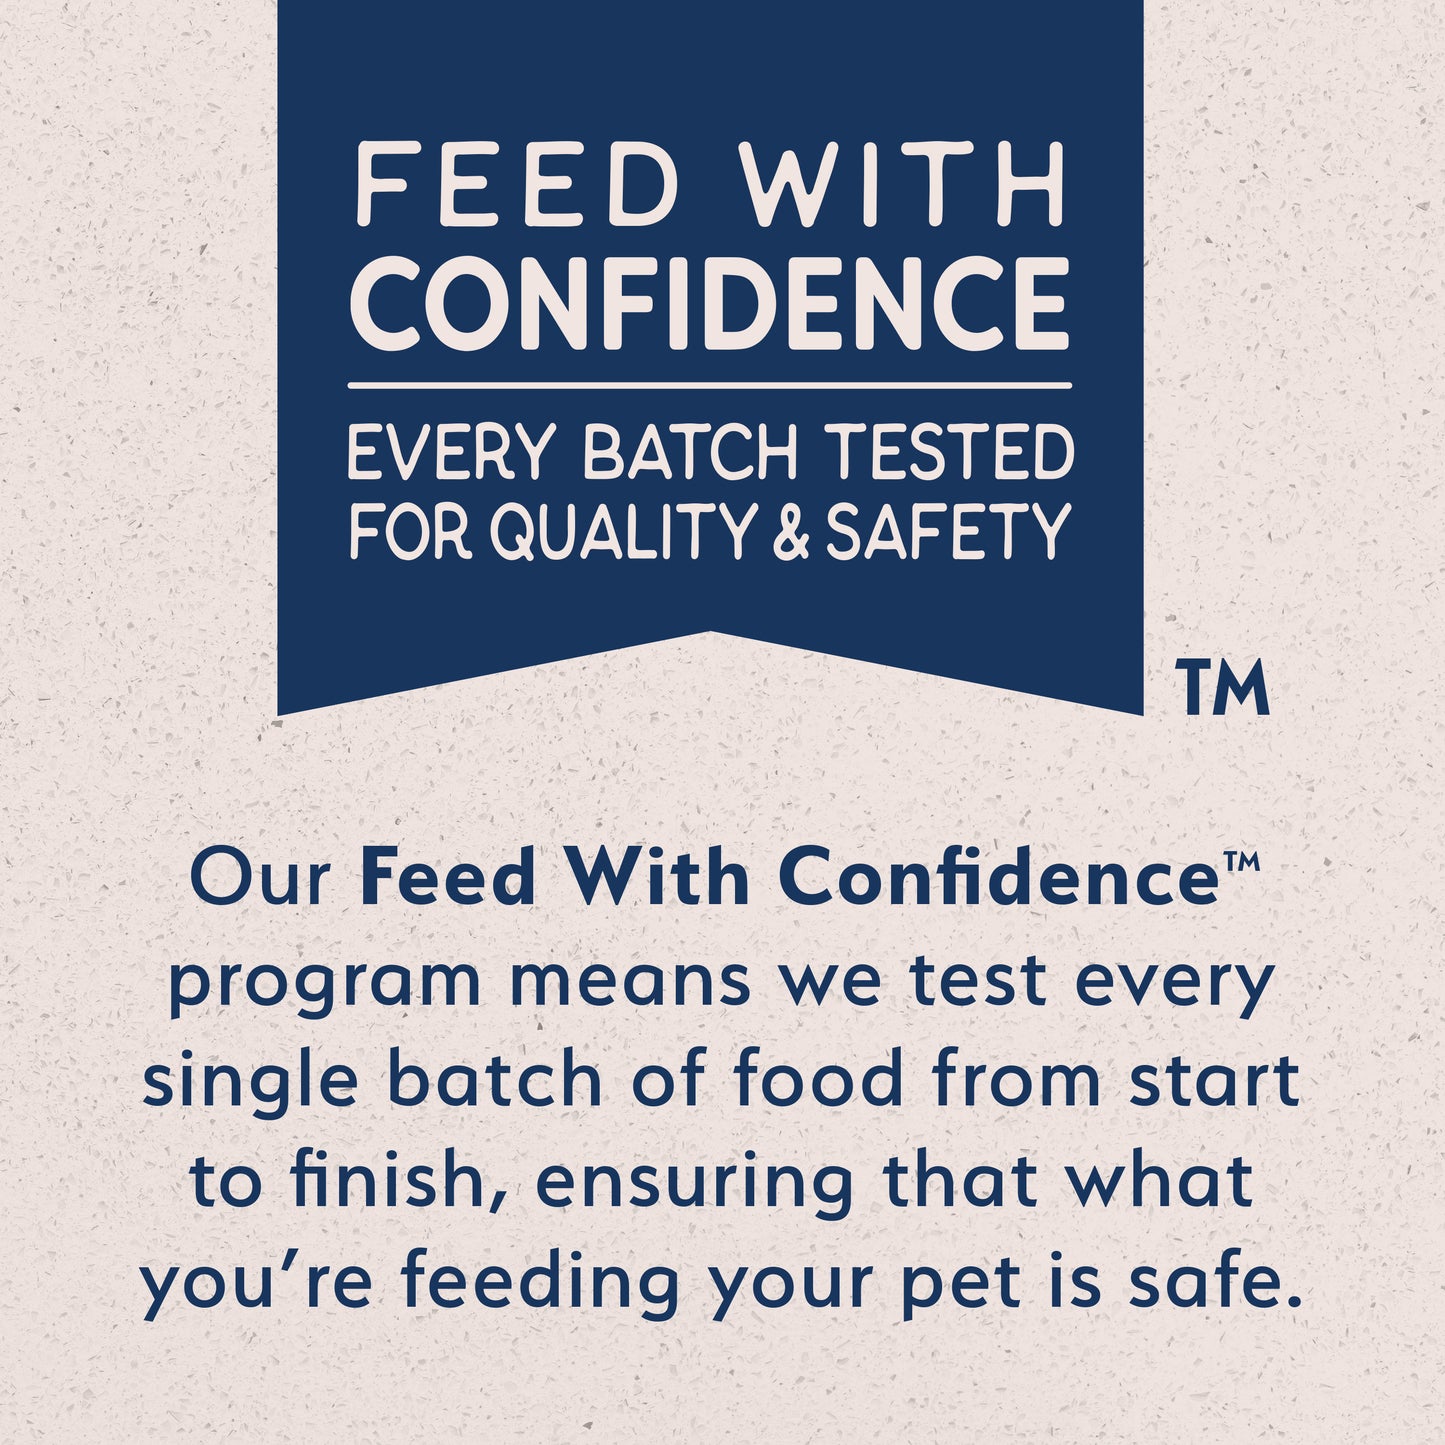 Natural Balance Canned Dog Food Sweet Potato and Fish  Canned Dog Food  | PetMax Canada